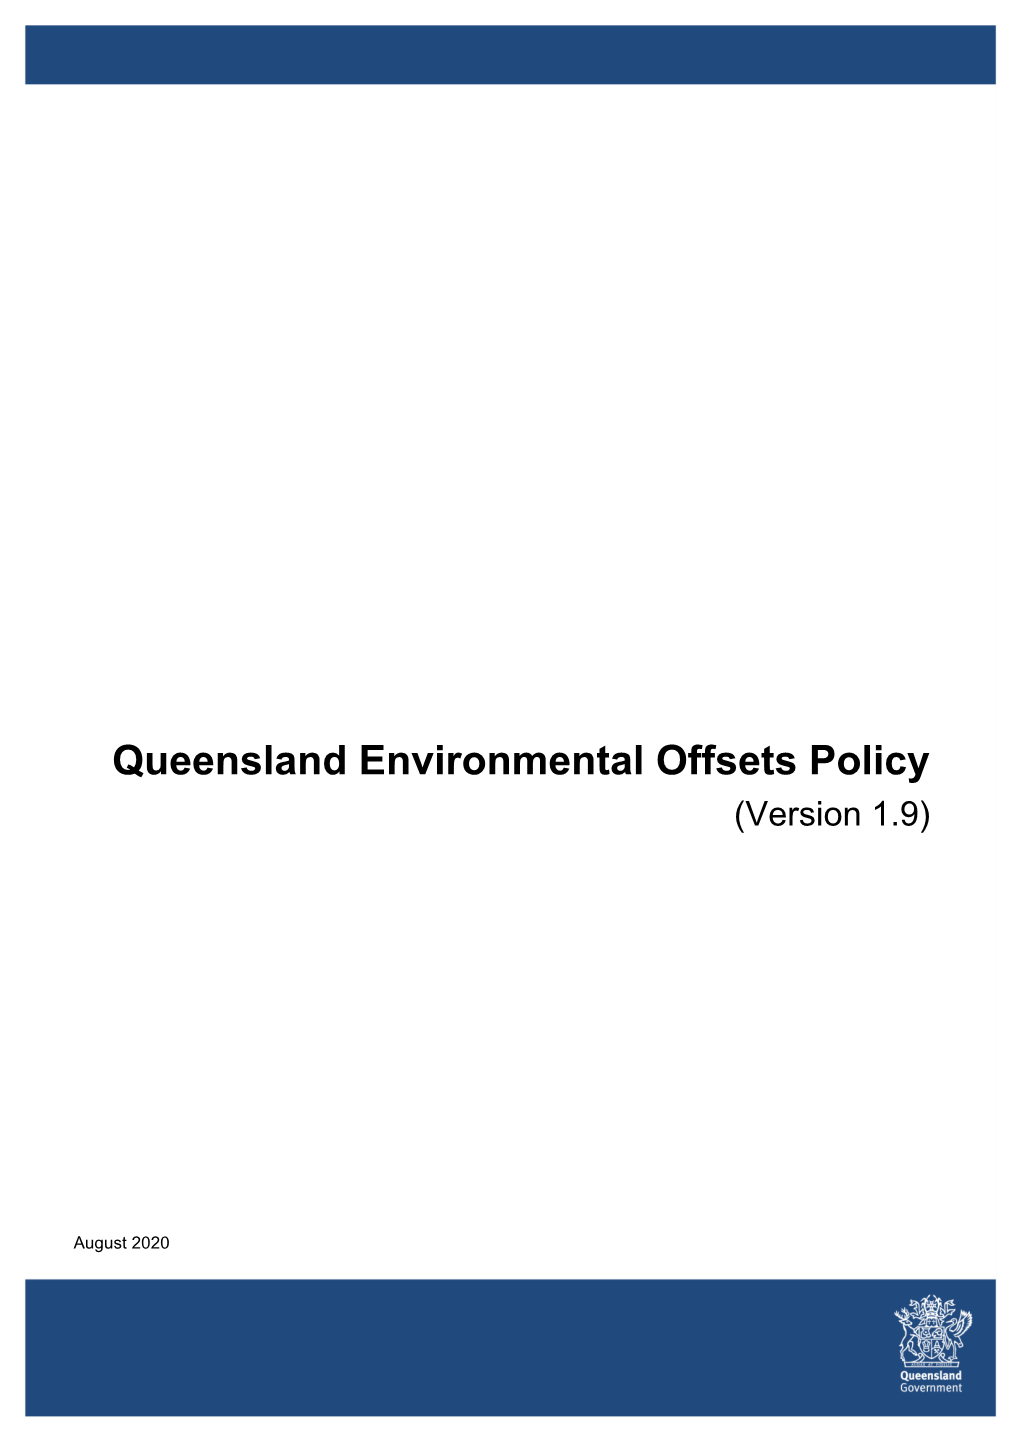 Queensland Environmental Offsets Policy (Version 1.9)